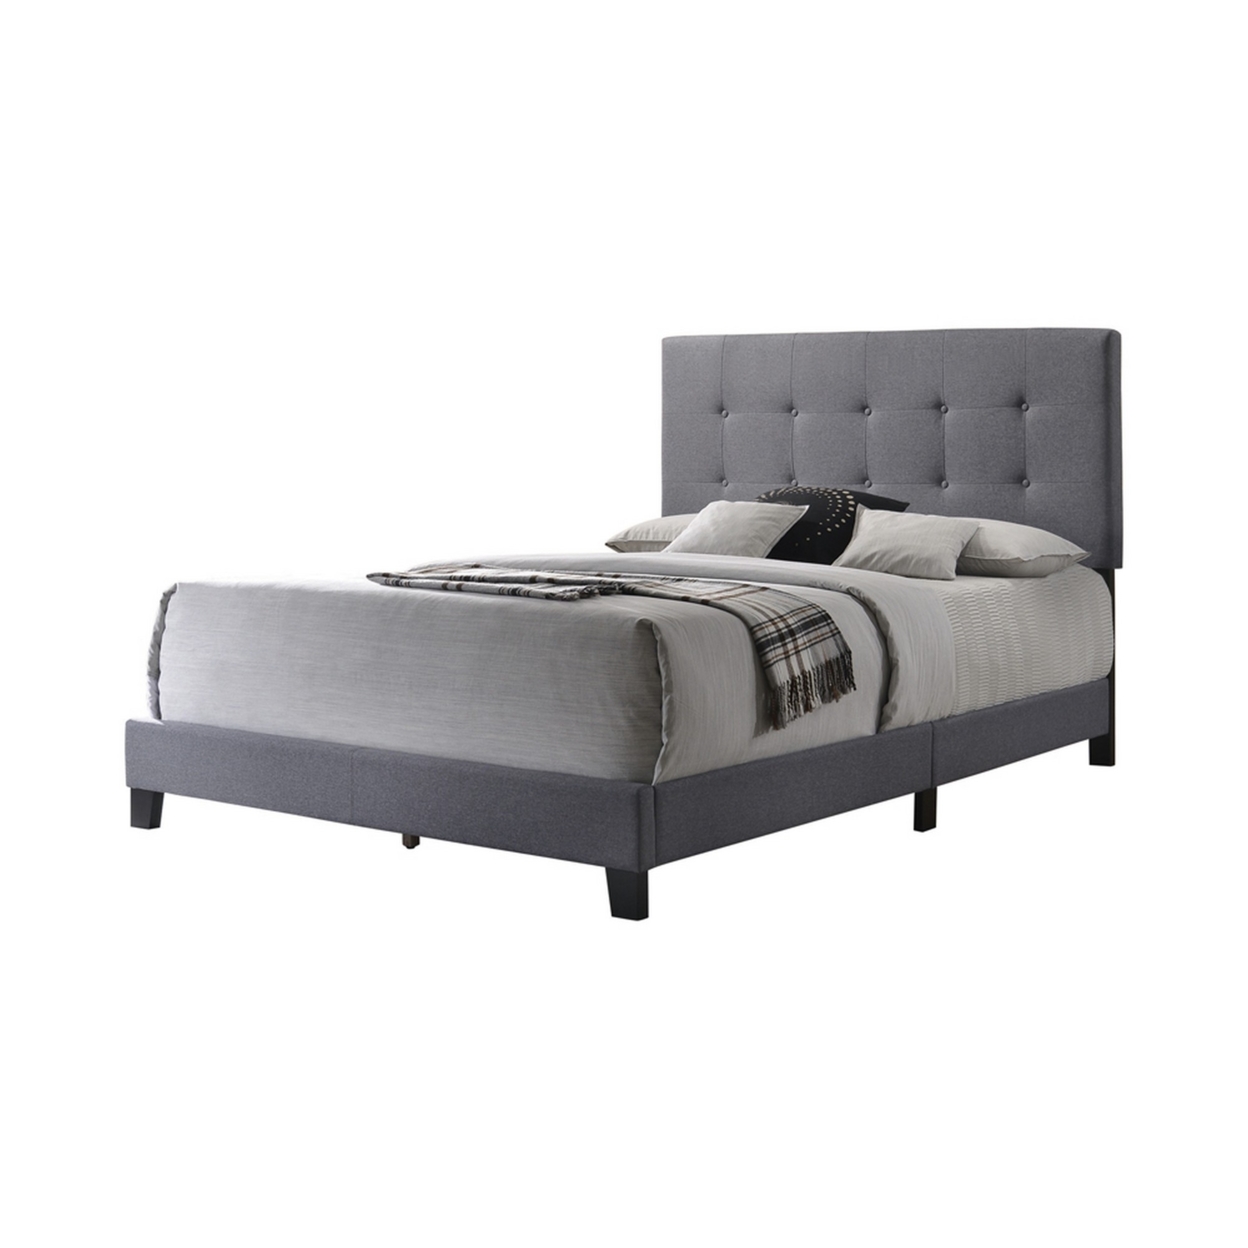 Queen Size Bed With Square Button Tufted Headboard And Chamfered Legs, Gray- Saltoro Sherpi